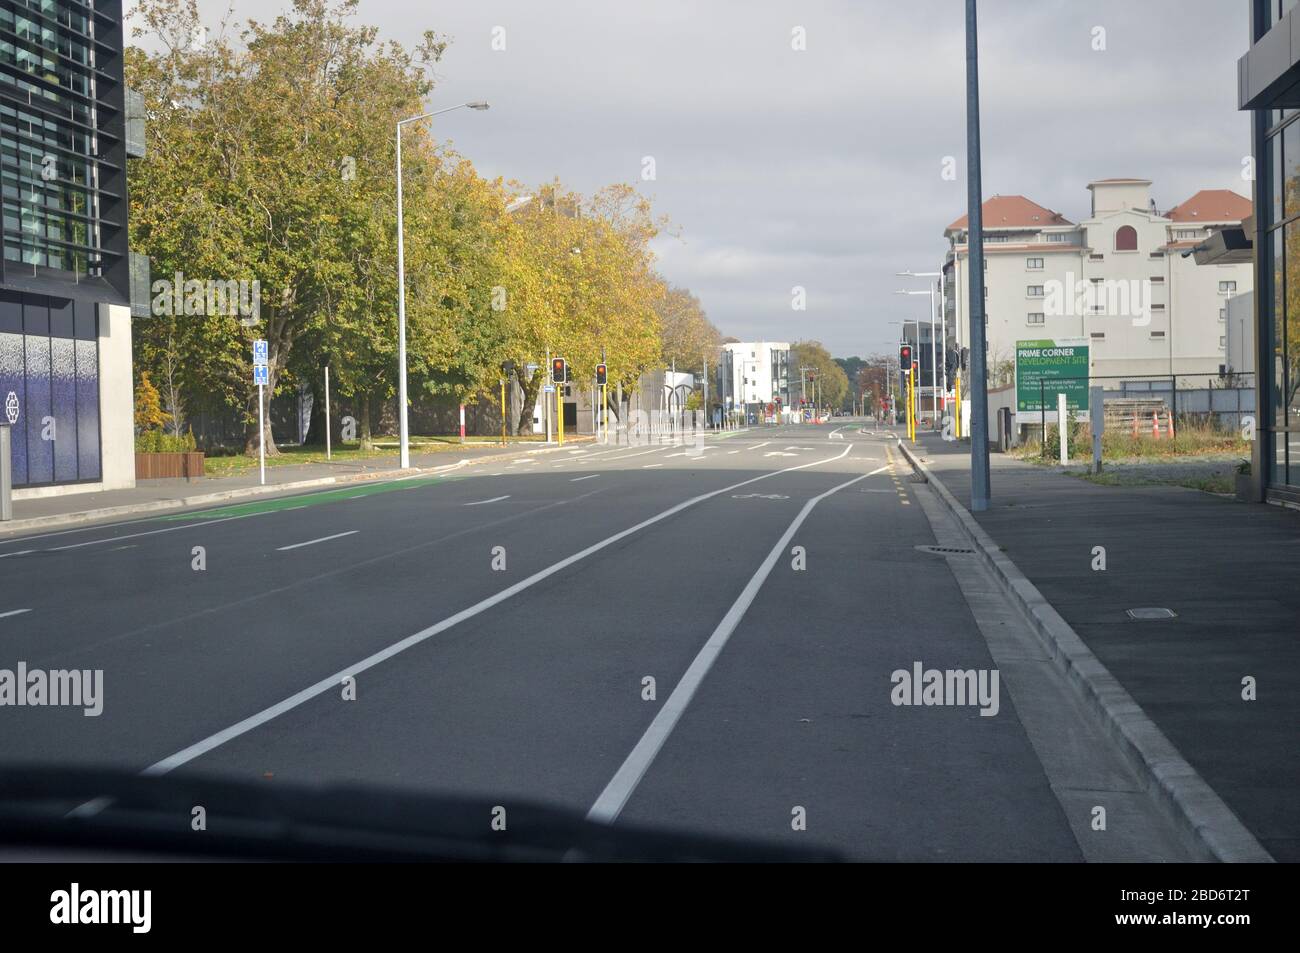 CHRISTCHURCH, NEW ZEALAND, MARCH 31, 2020; The normally busy streets of Christchurch are largely deserted during the Covid 19 lockdown in New Zealand, March 2020 Stock Photo